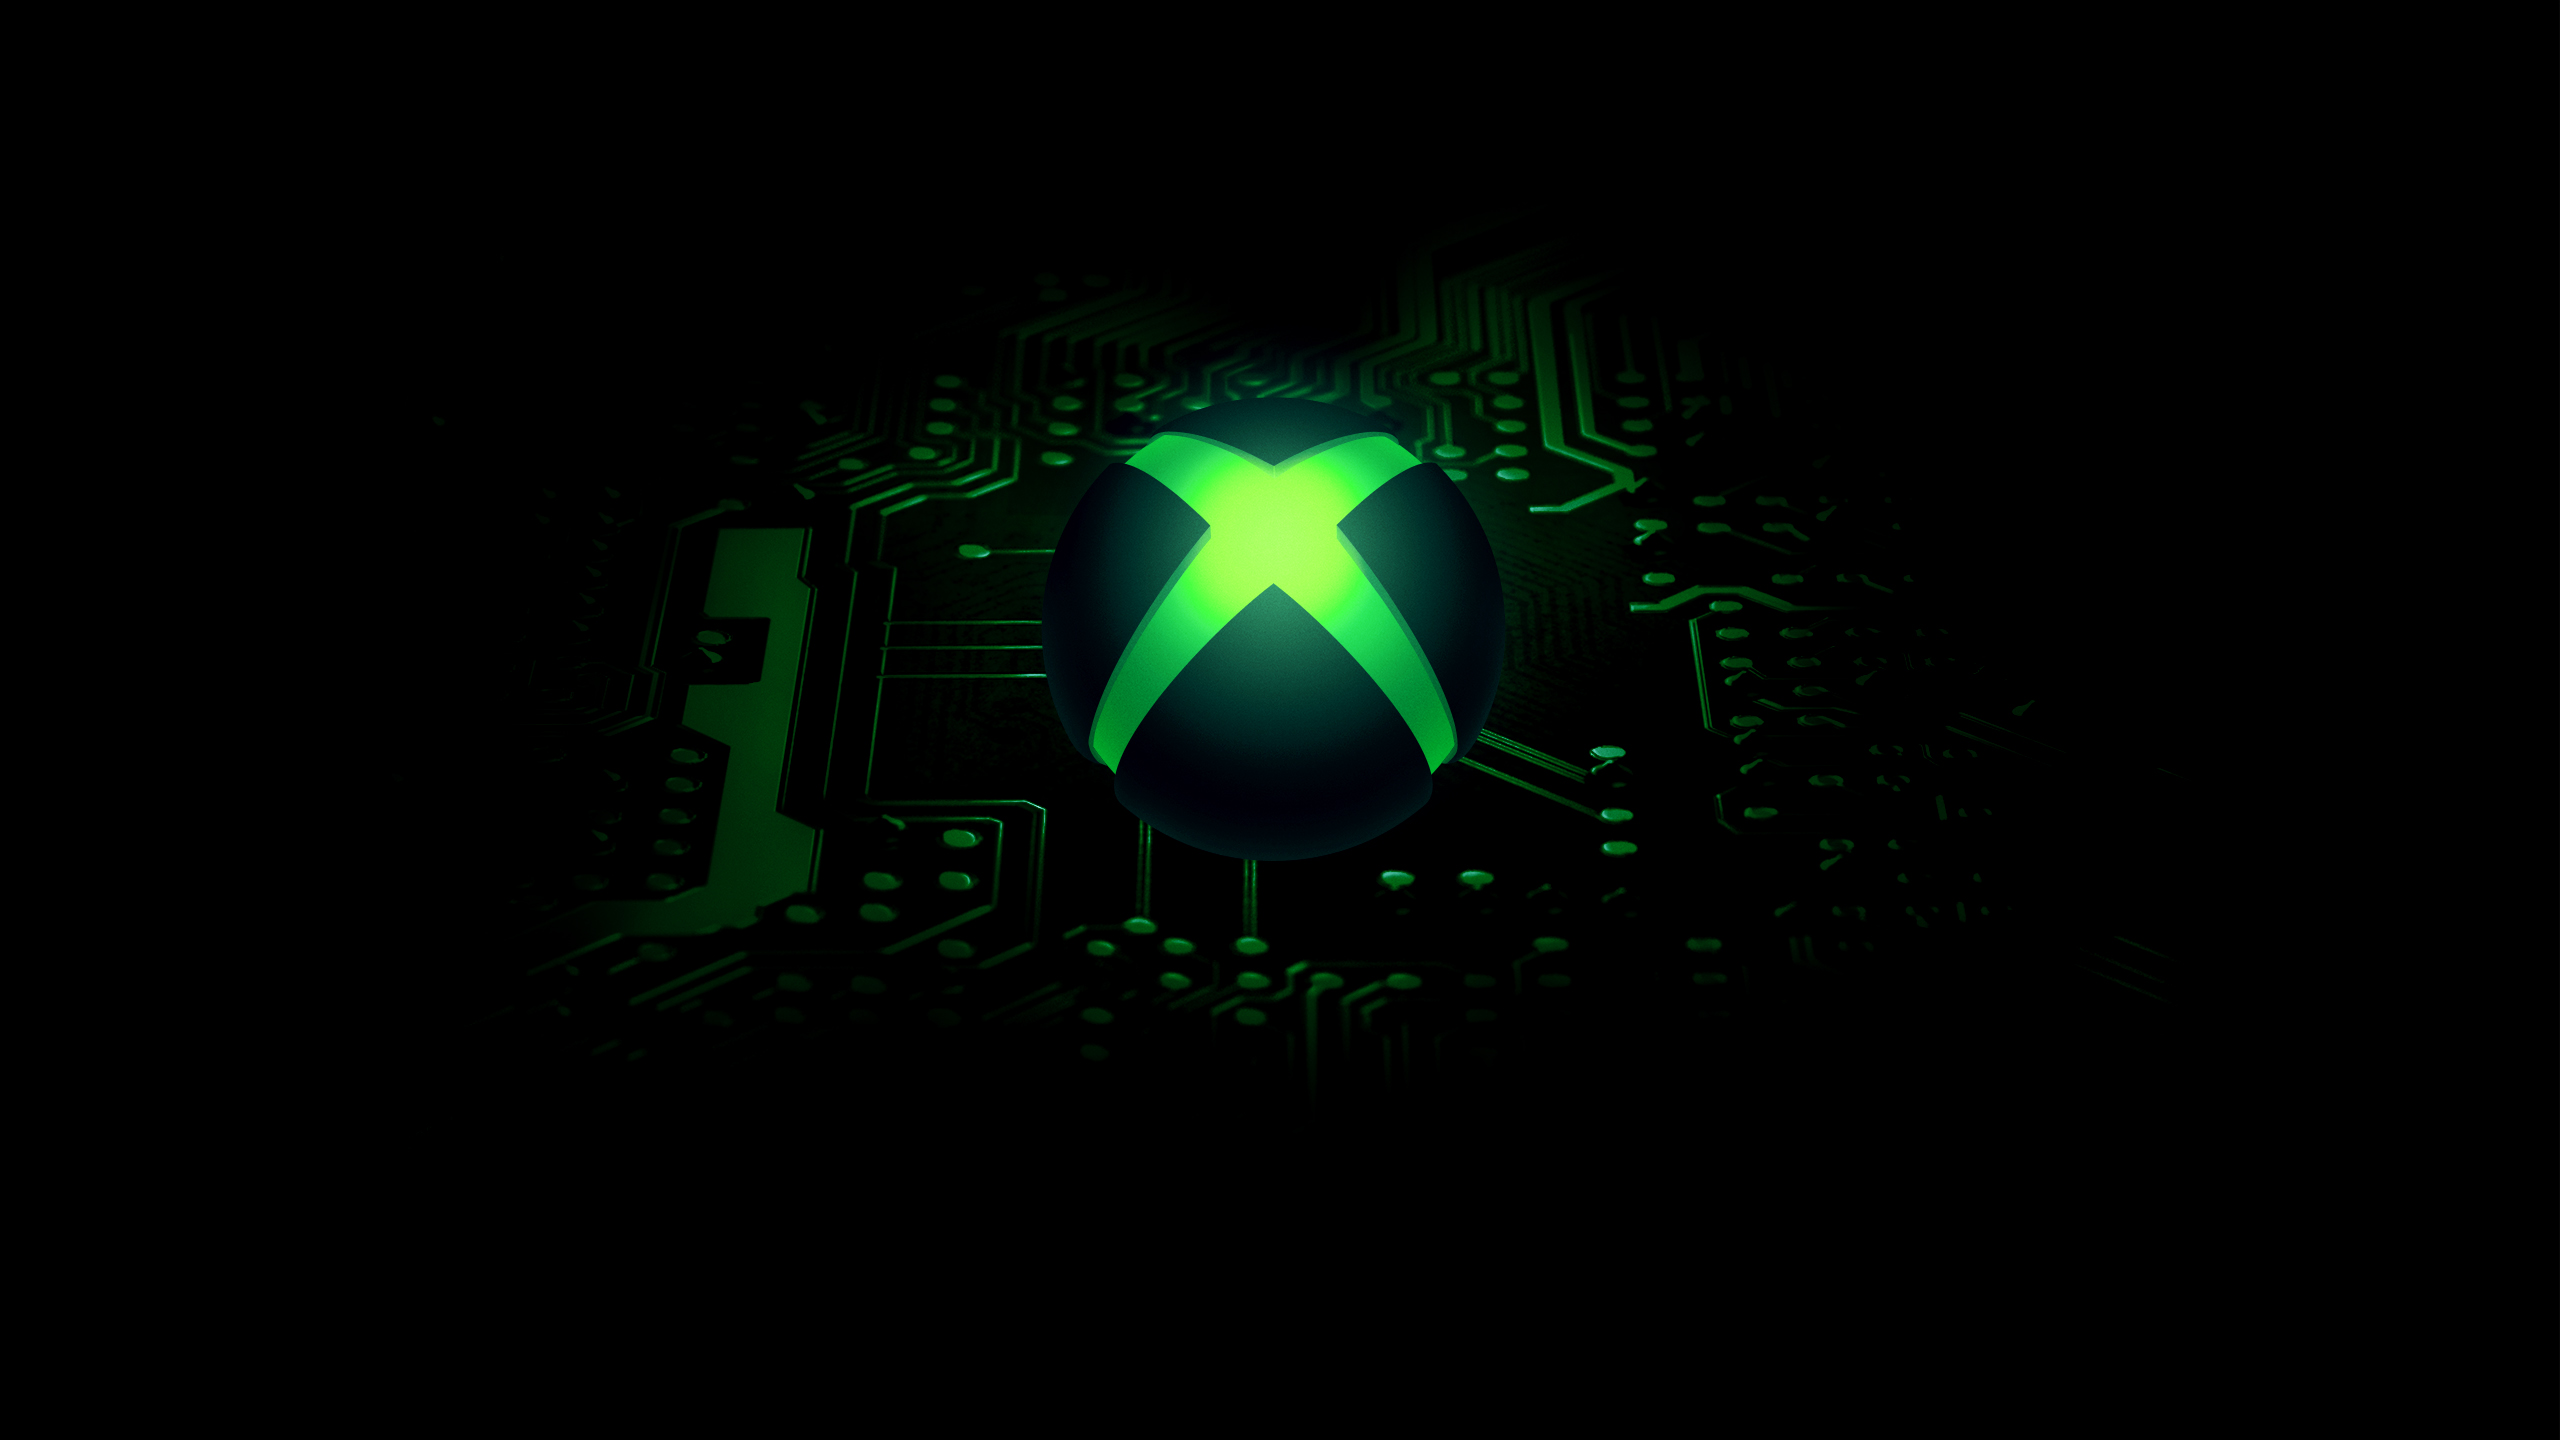 HD Xbox-themed desktop wallpaper featuring a glowing green Xbox logo on a dark, circuit-inspired background.